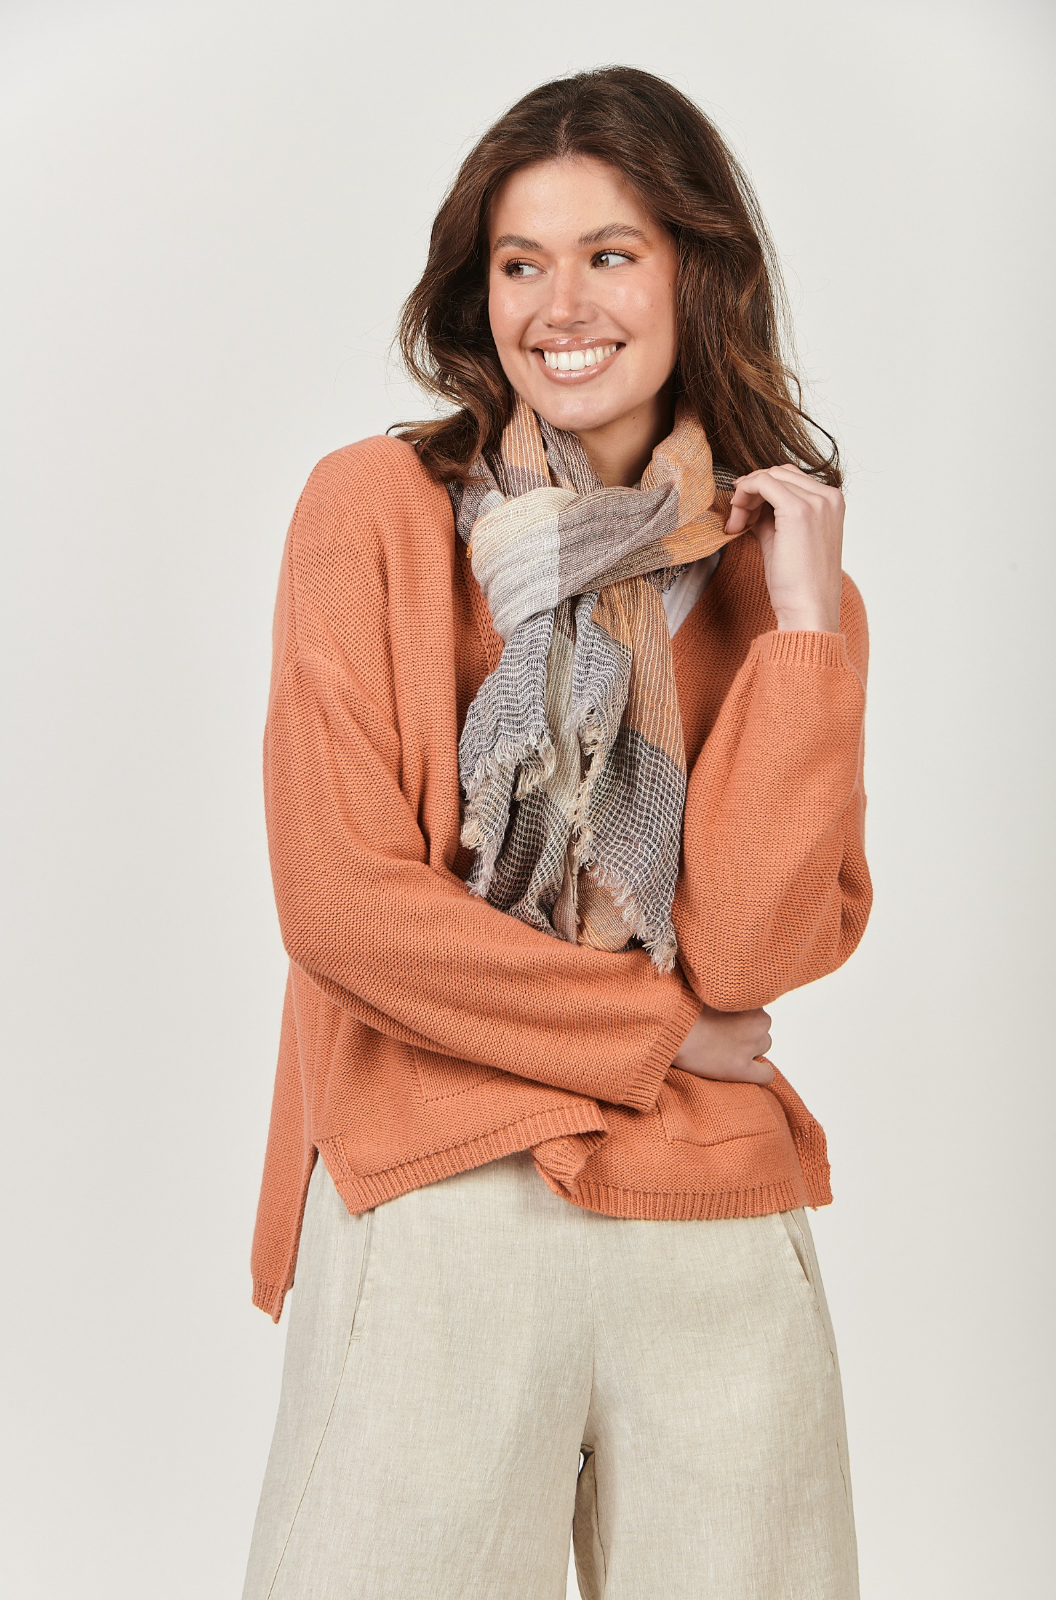 Naturals by O & J Linen Scarf in Chai